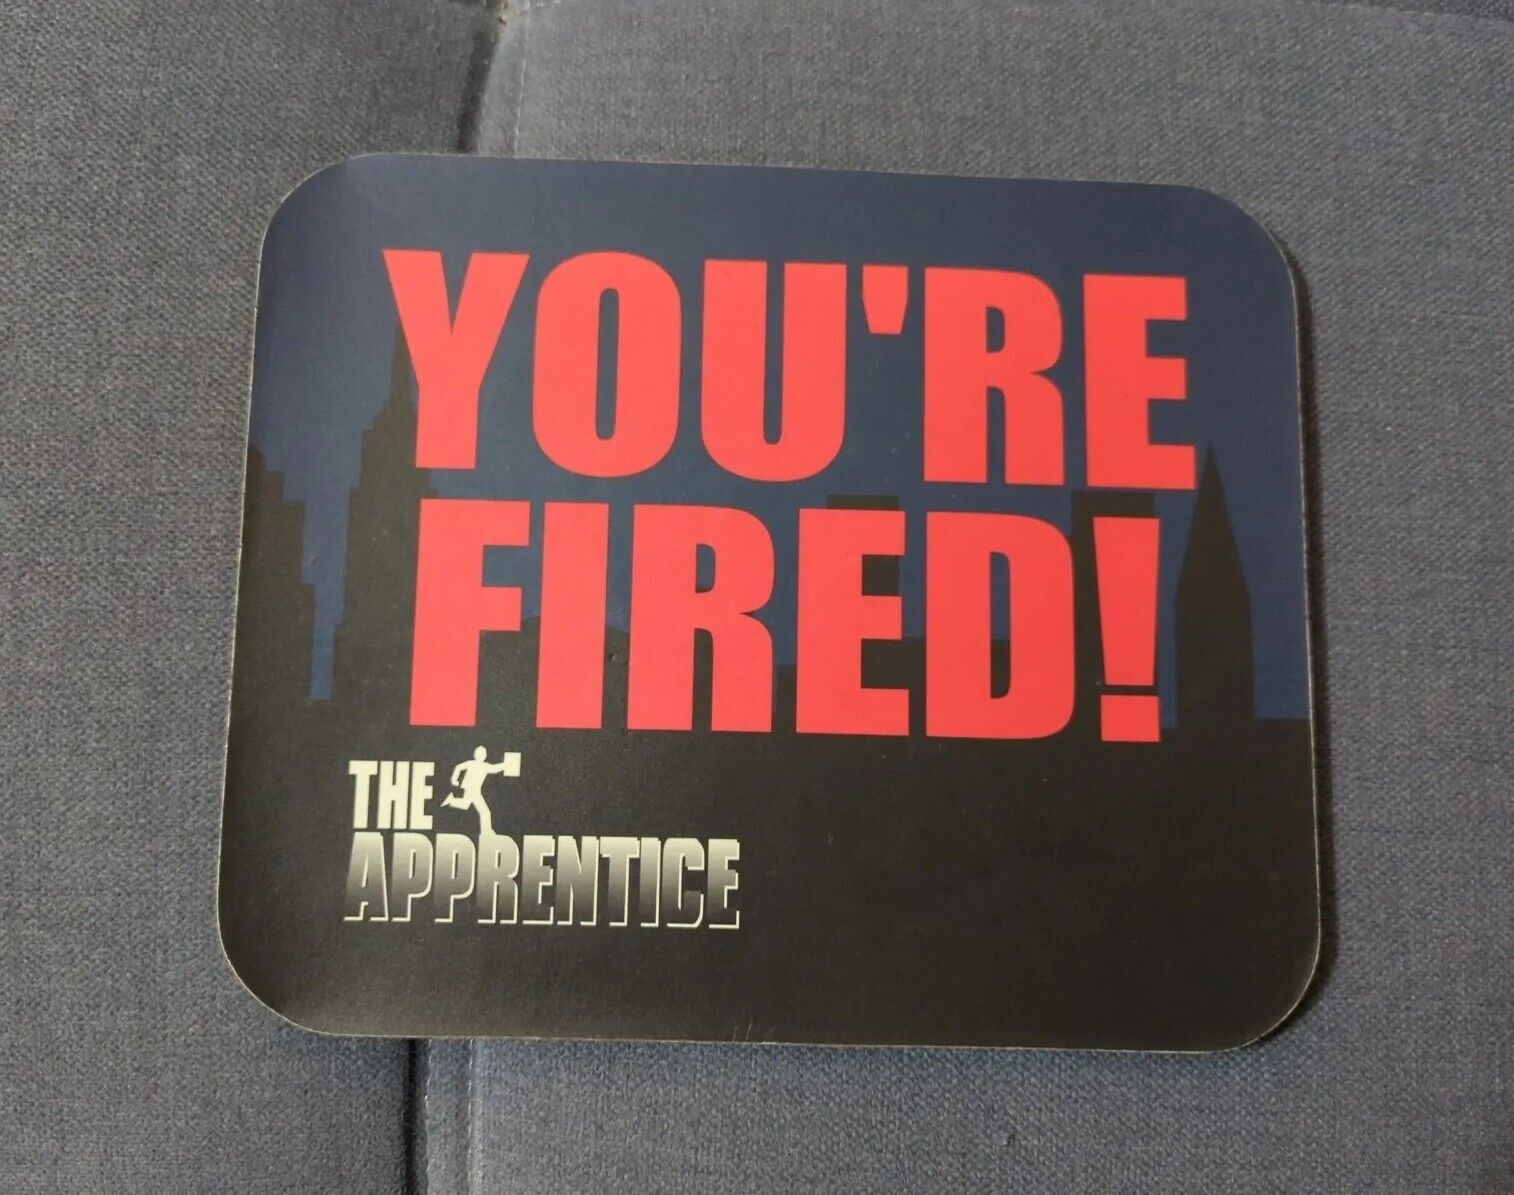 AUTHENTIC Donald Trump Mousepad Apprentice You’re Fired Vintage 